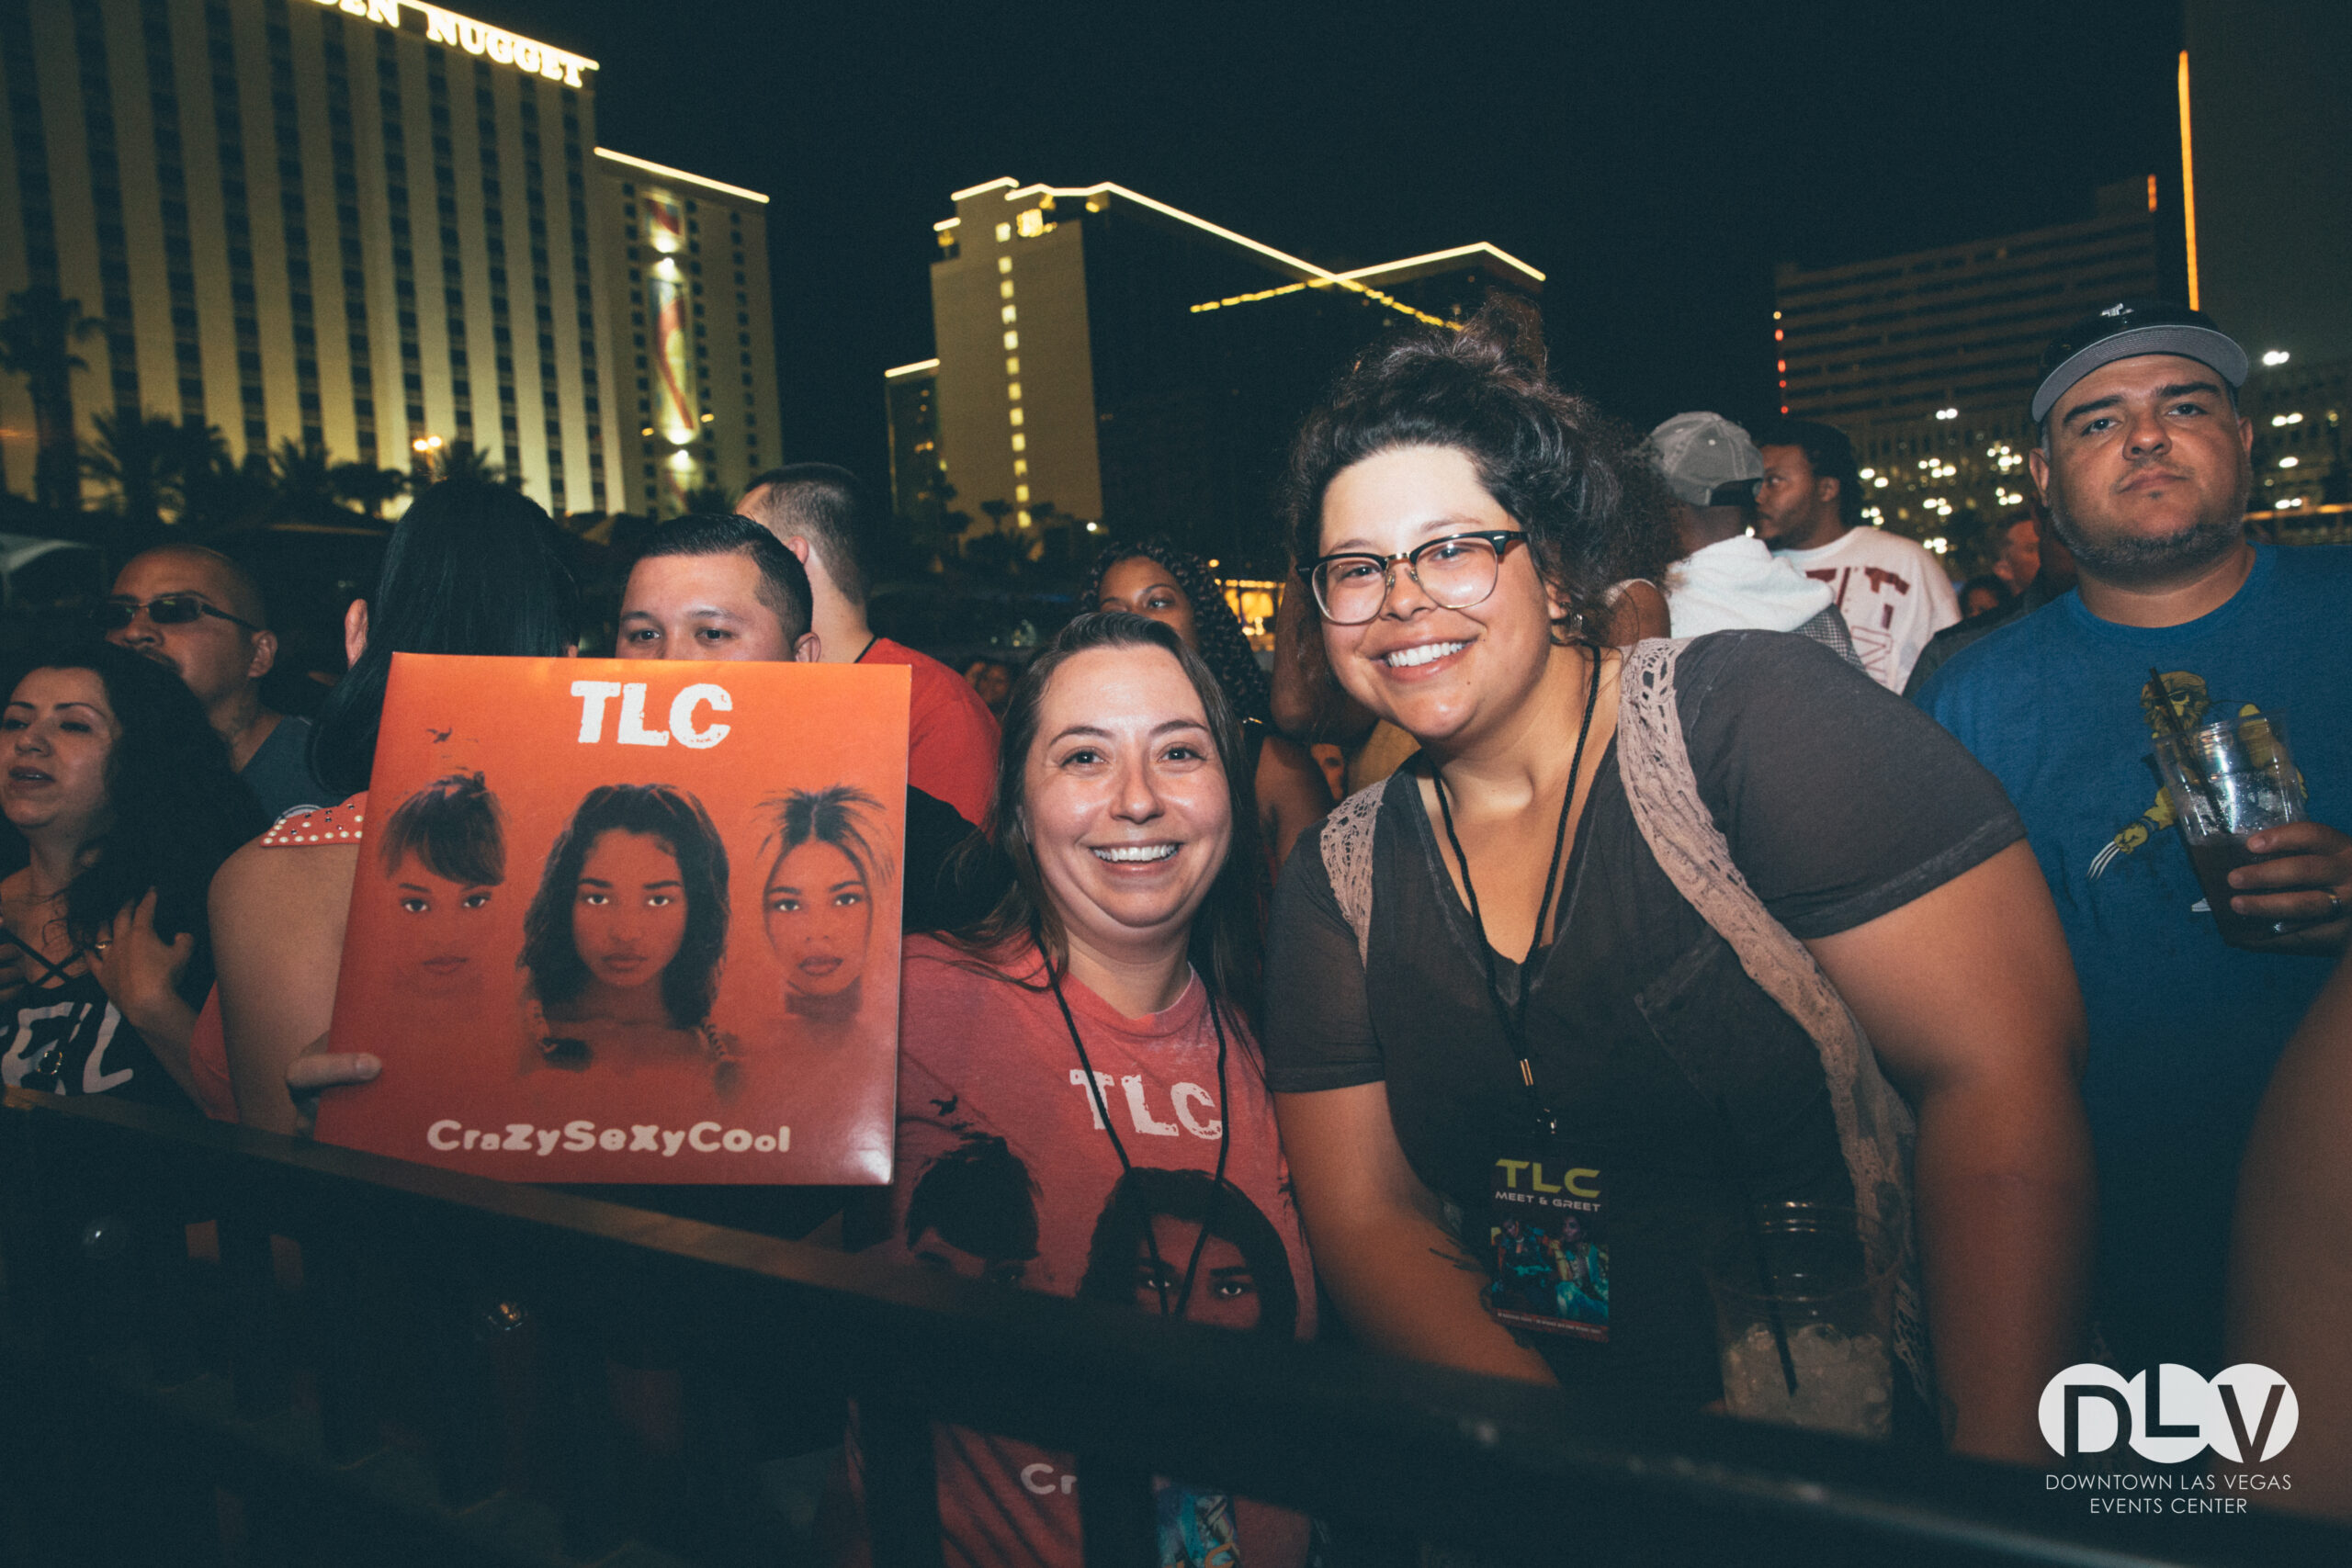 Fan holding up a TLC vinyl at the “I Love The 90s” show at the Downtown Las Vegas Events Center